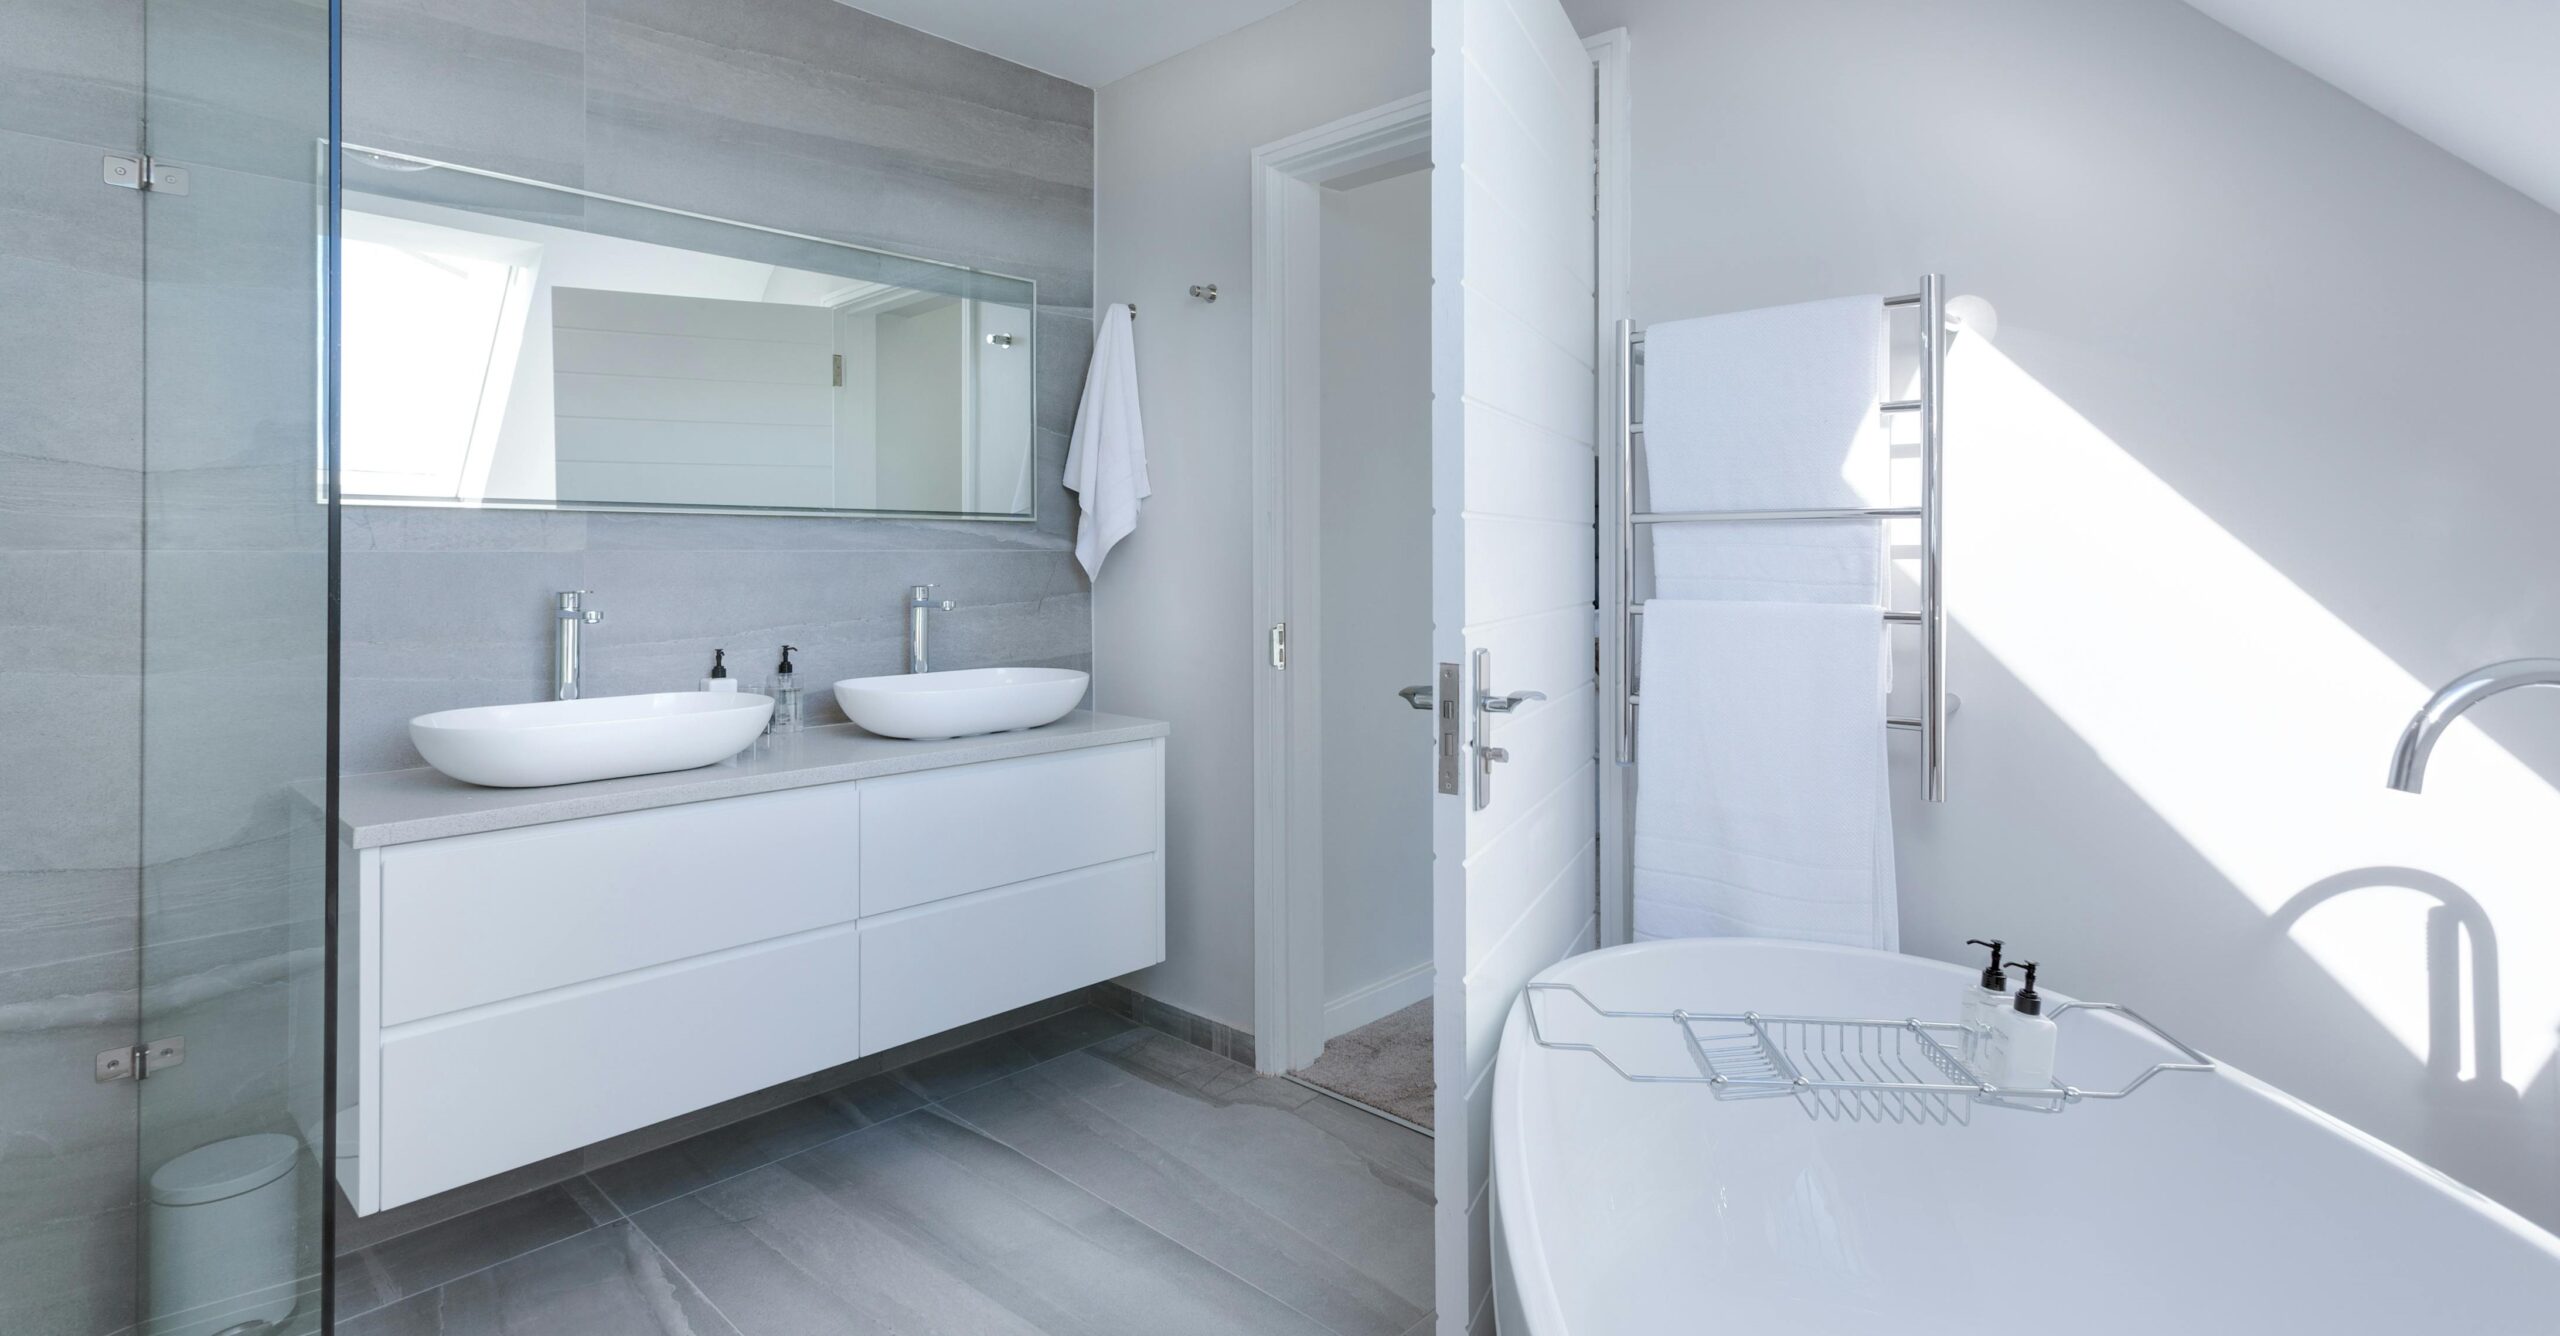 This minimalist bathroom has been thoroughly cleaned and de-cluttered.